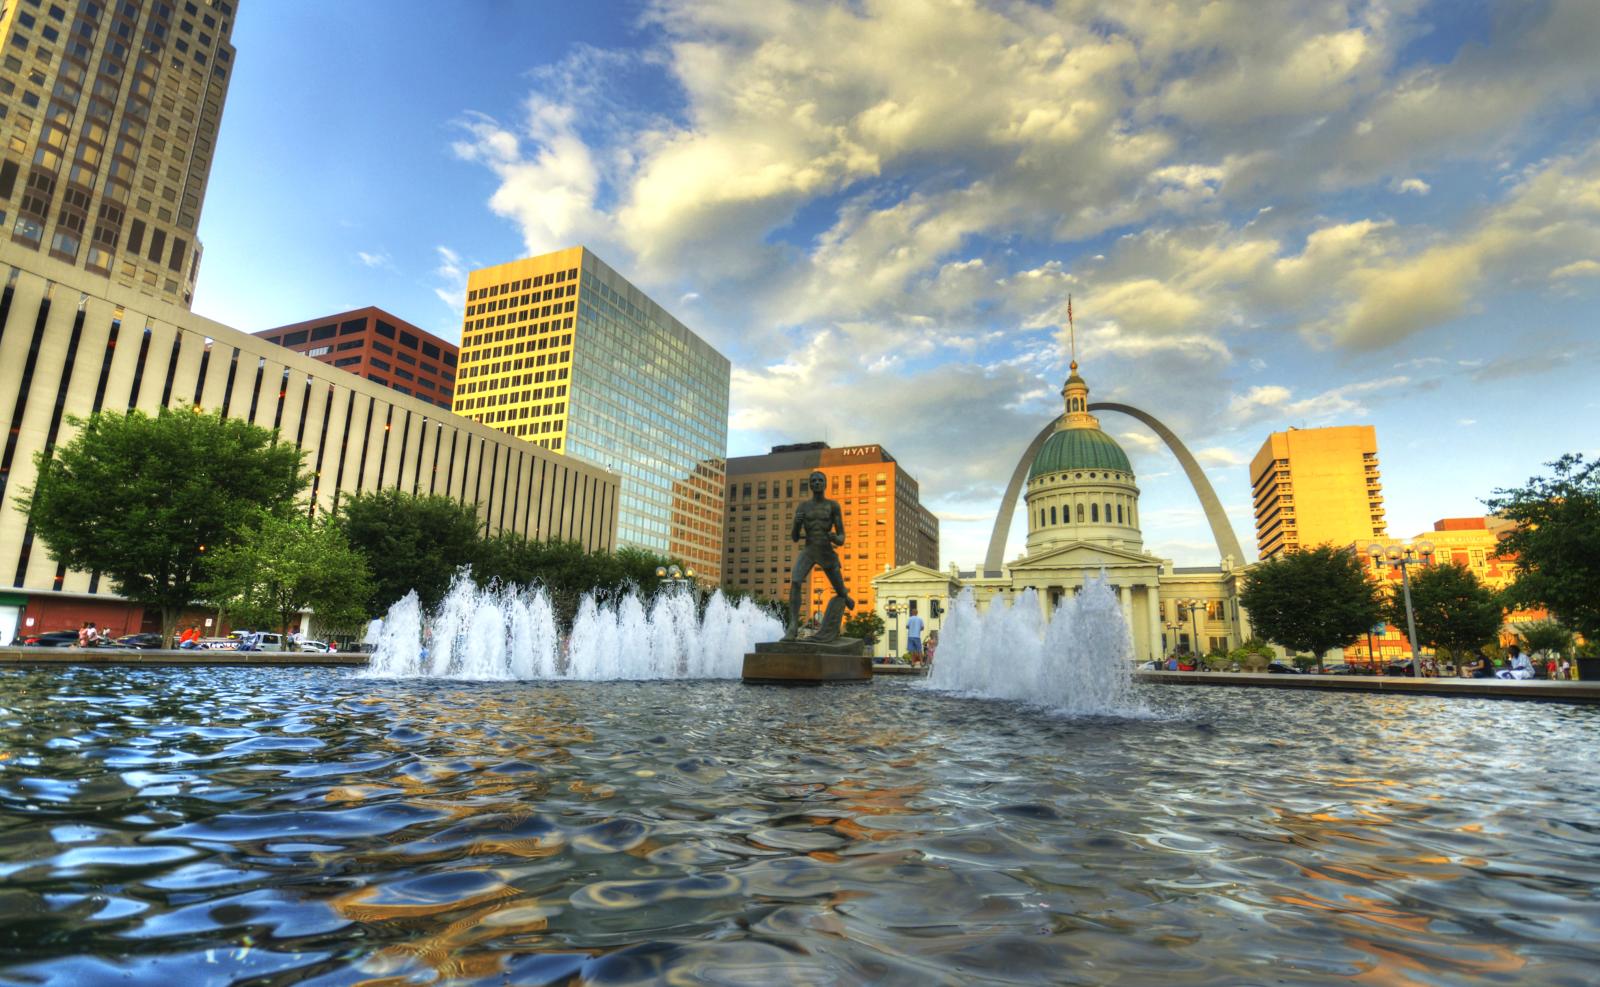 Givable | 10 St. Louis Attractions Where You can Spend Your Spare Change